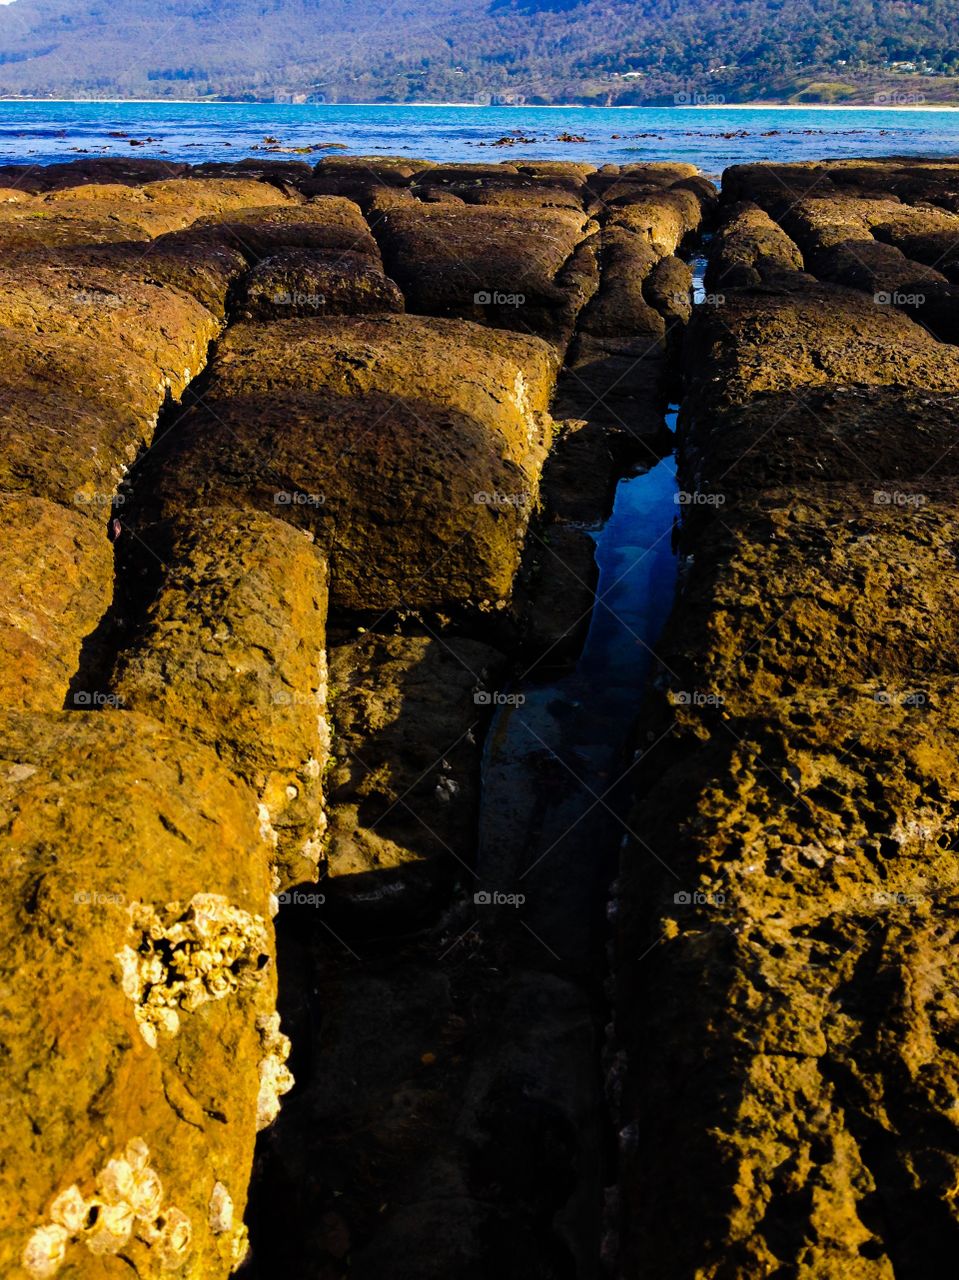 Fractures. Water filling the fracture at the tessellated pavement in Tasmania